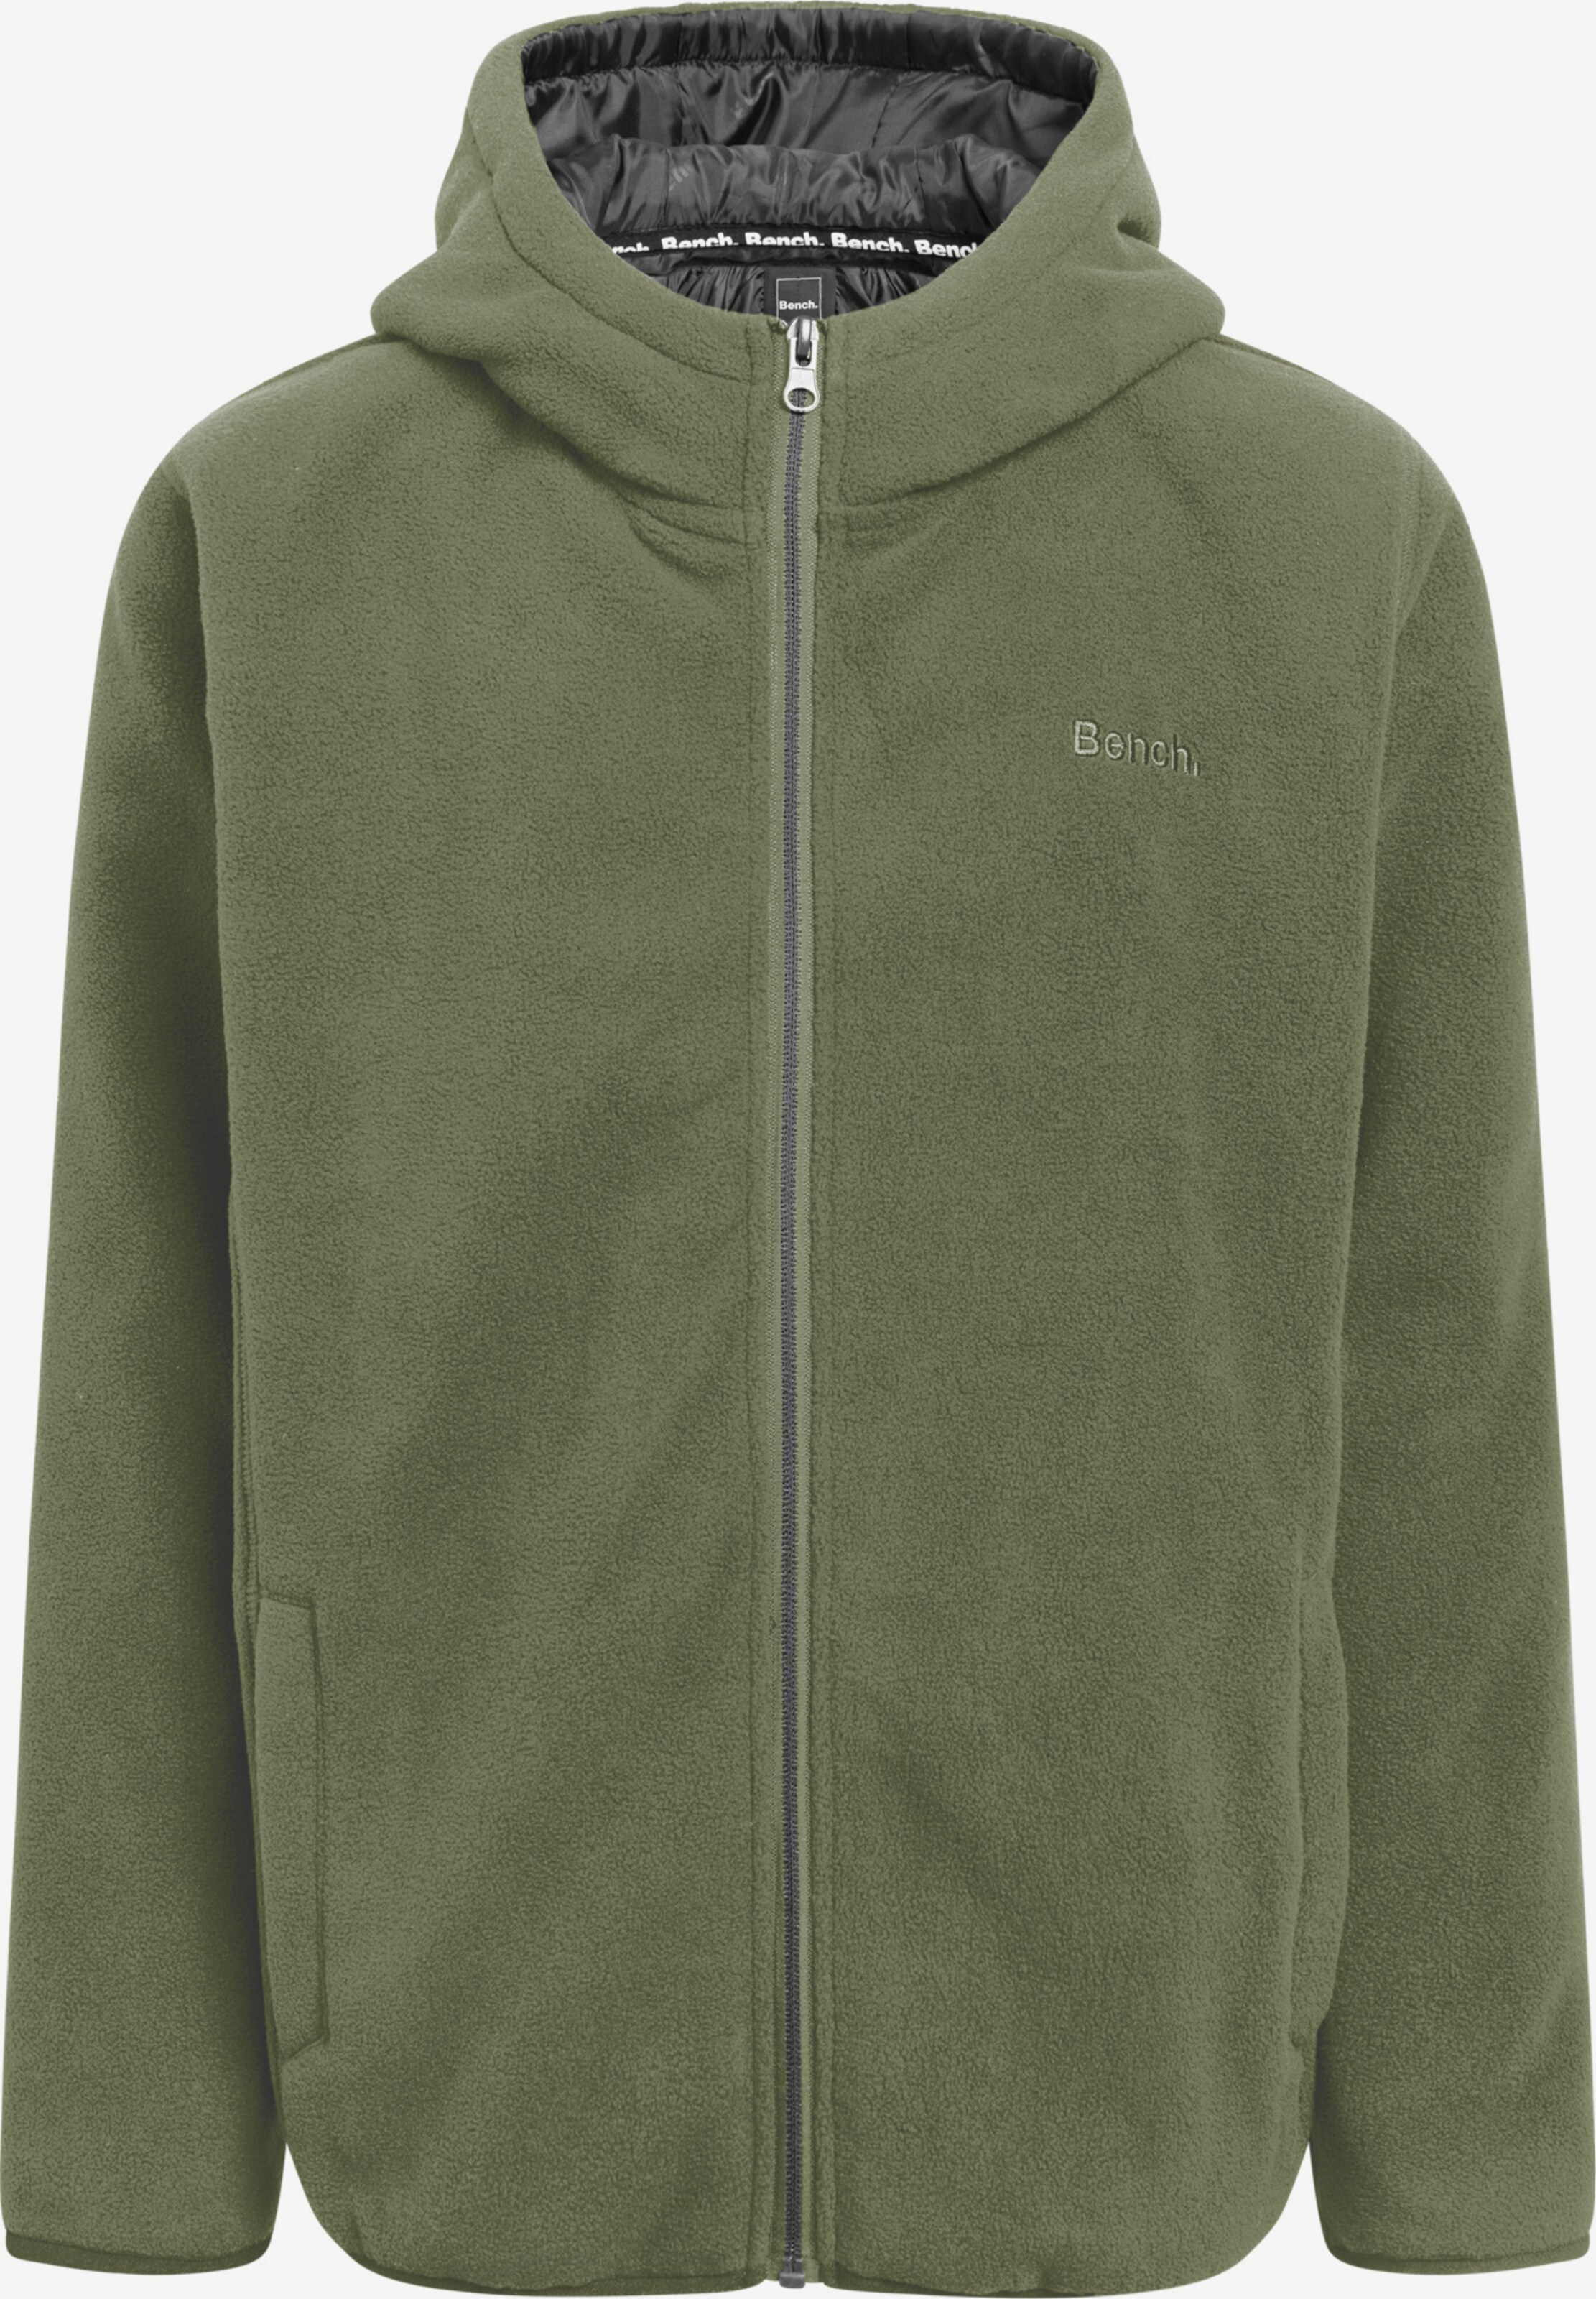 YOU Jacket ABOUT Fleece Olive | in \'DRAKEN\' BENCH